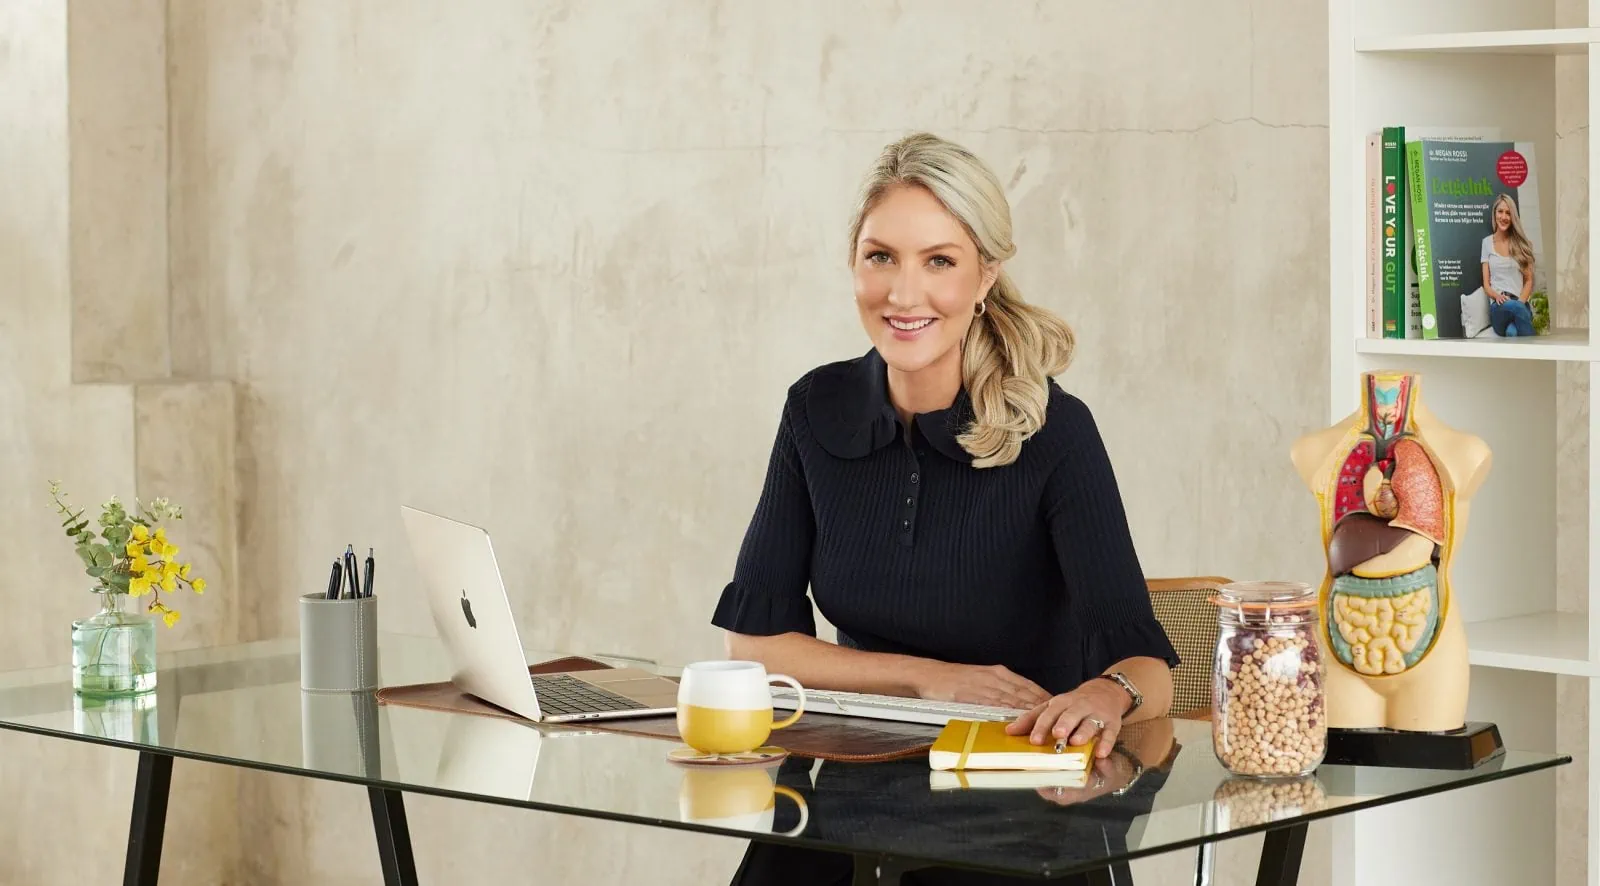  Photo of Dr Megan Rossi, founder of The Gut Health Doctor, seated at a desk looking professional and smiling at the camera